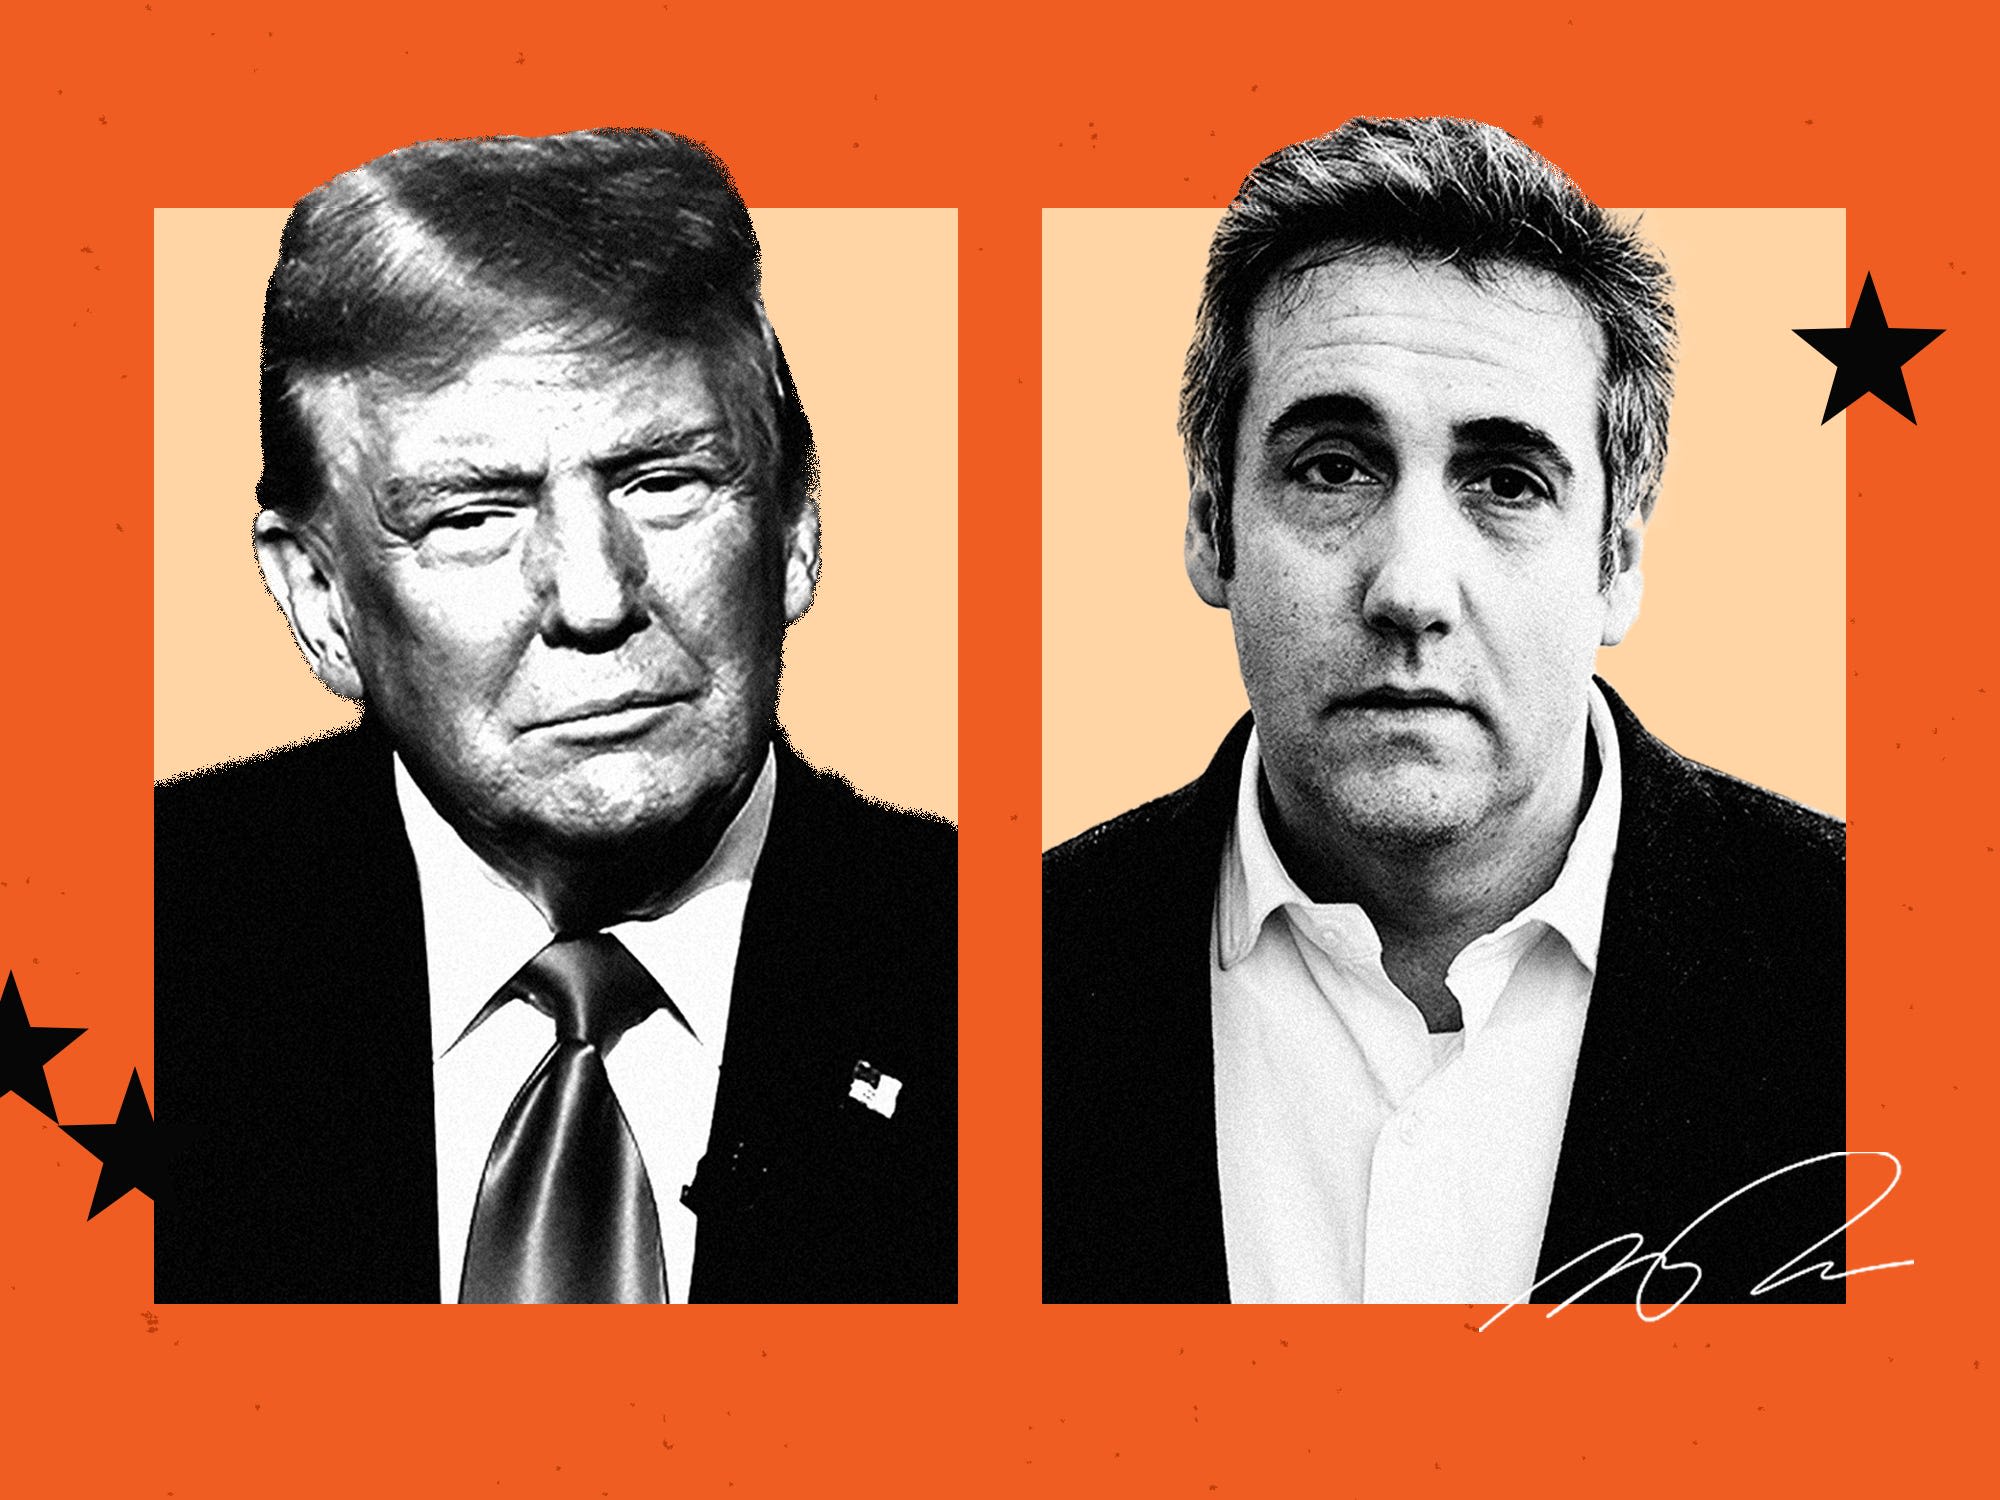 'A big family': At trial, Michael Cohen recalls when he and Trump arranged hush-money as co-conspirator besties